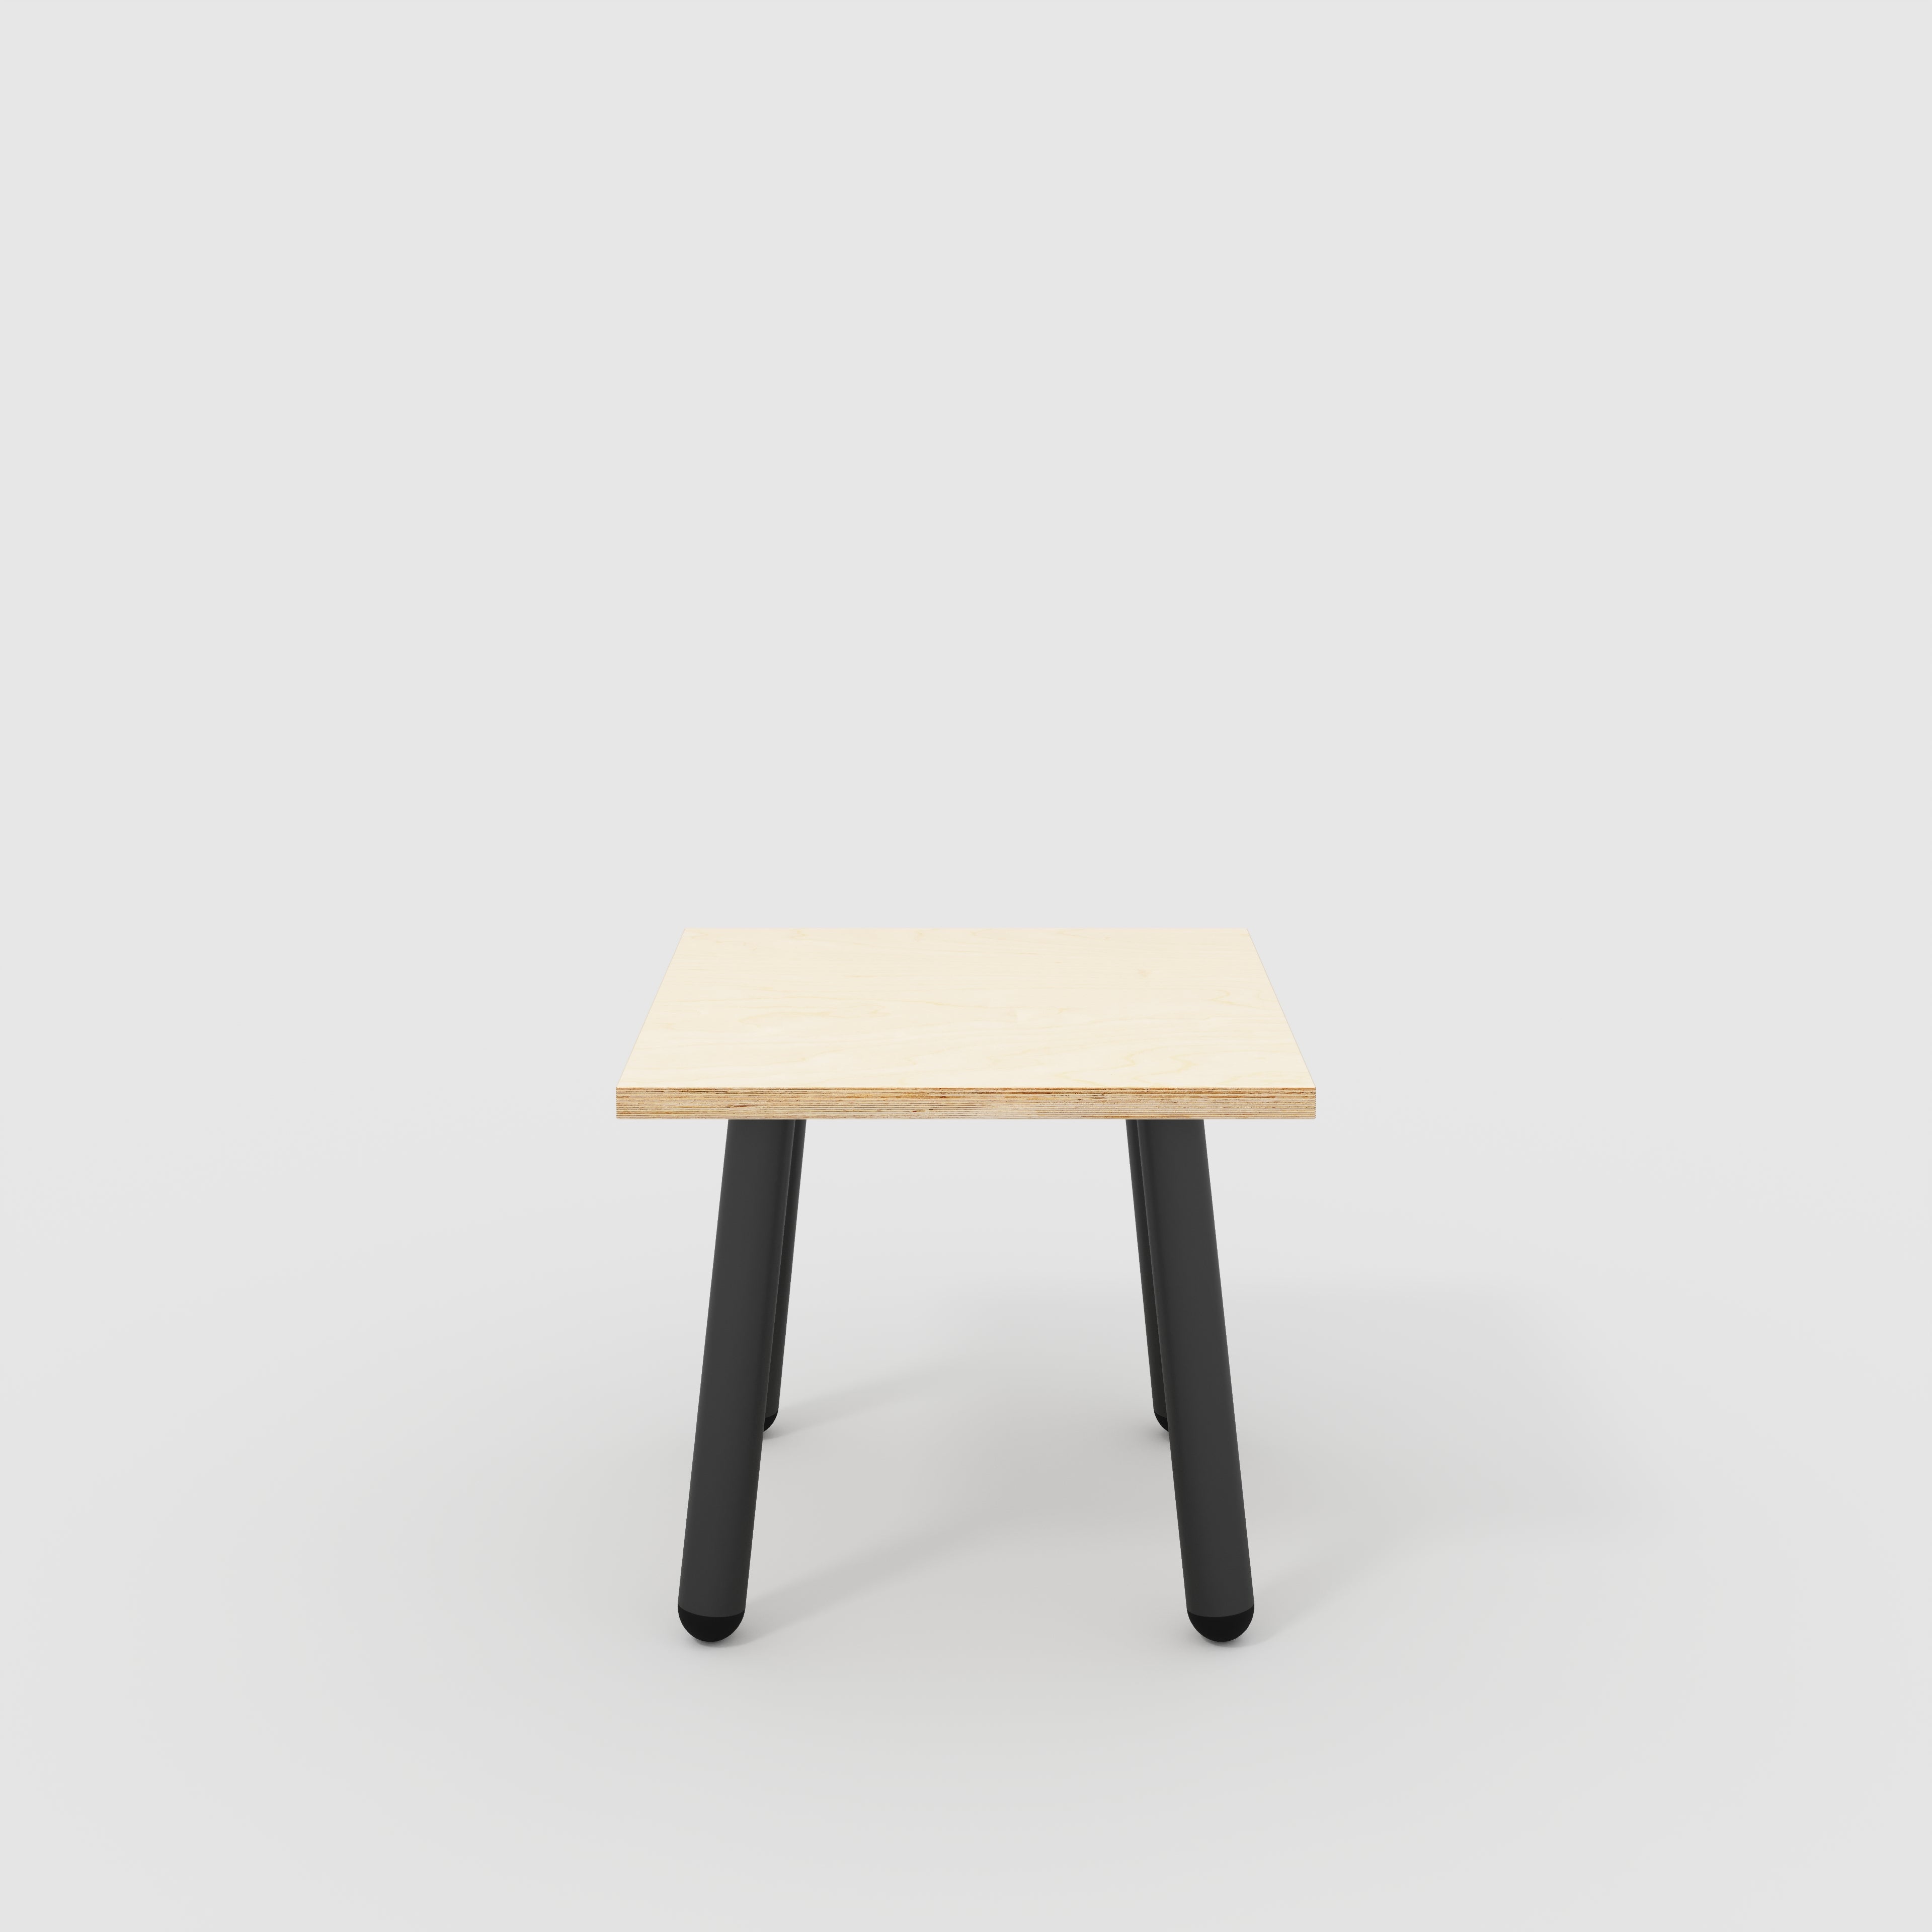 Side Table with Round Single Pin Legs - Plywood Birch - 500(w) x 500(d) x 425(h)